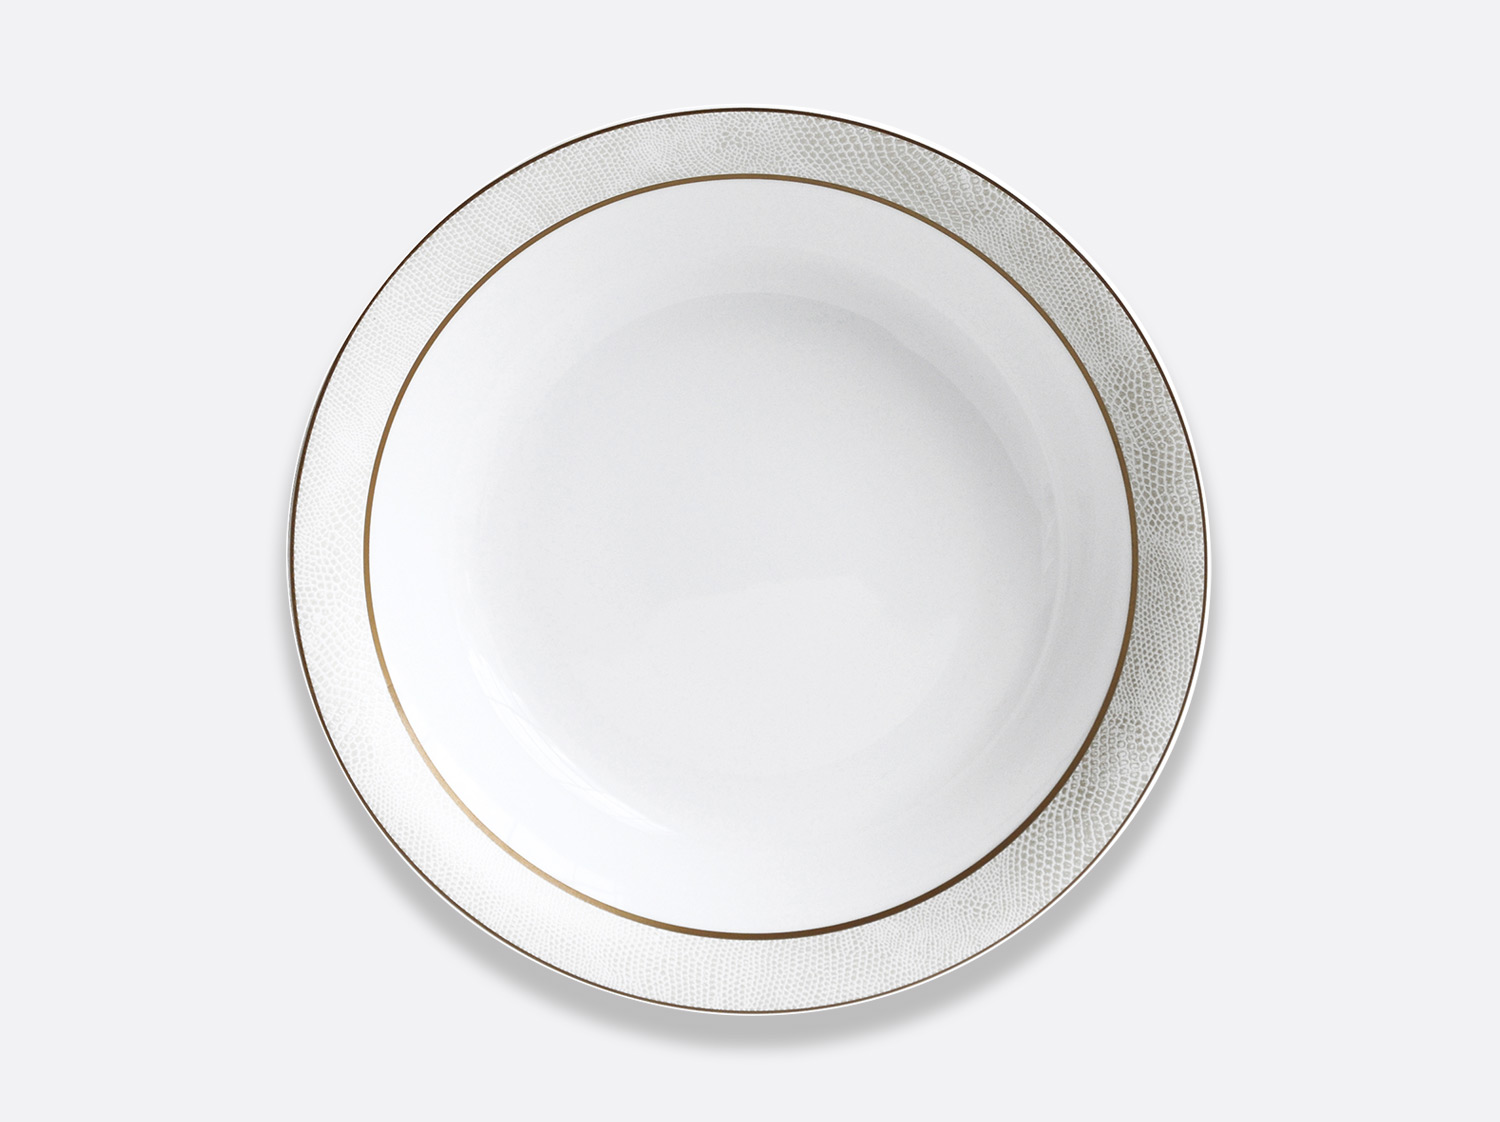 China Open vegetable bowl of the collection Sauvage Or Blanc | Bernardaud